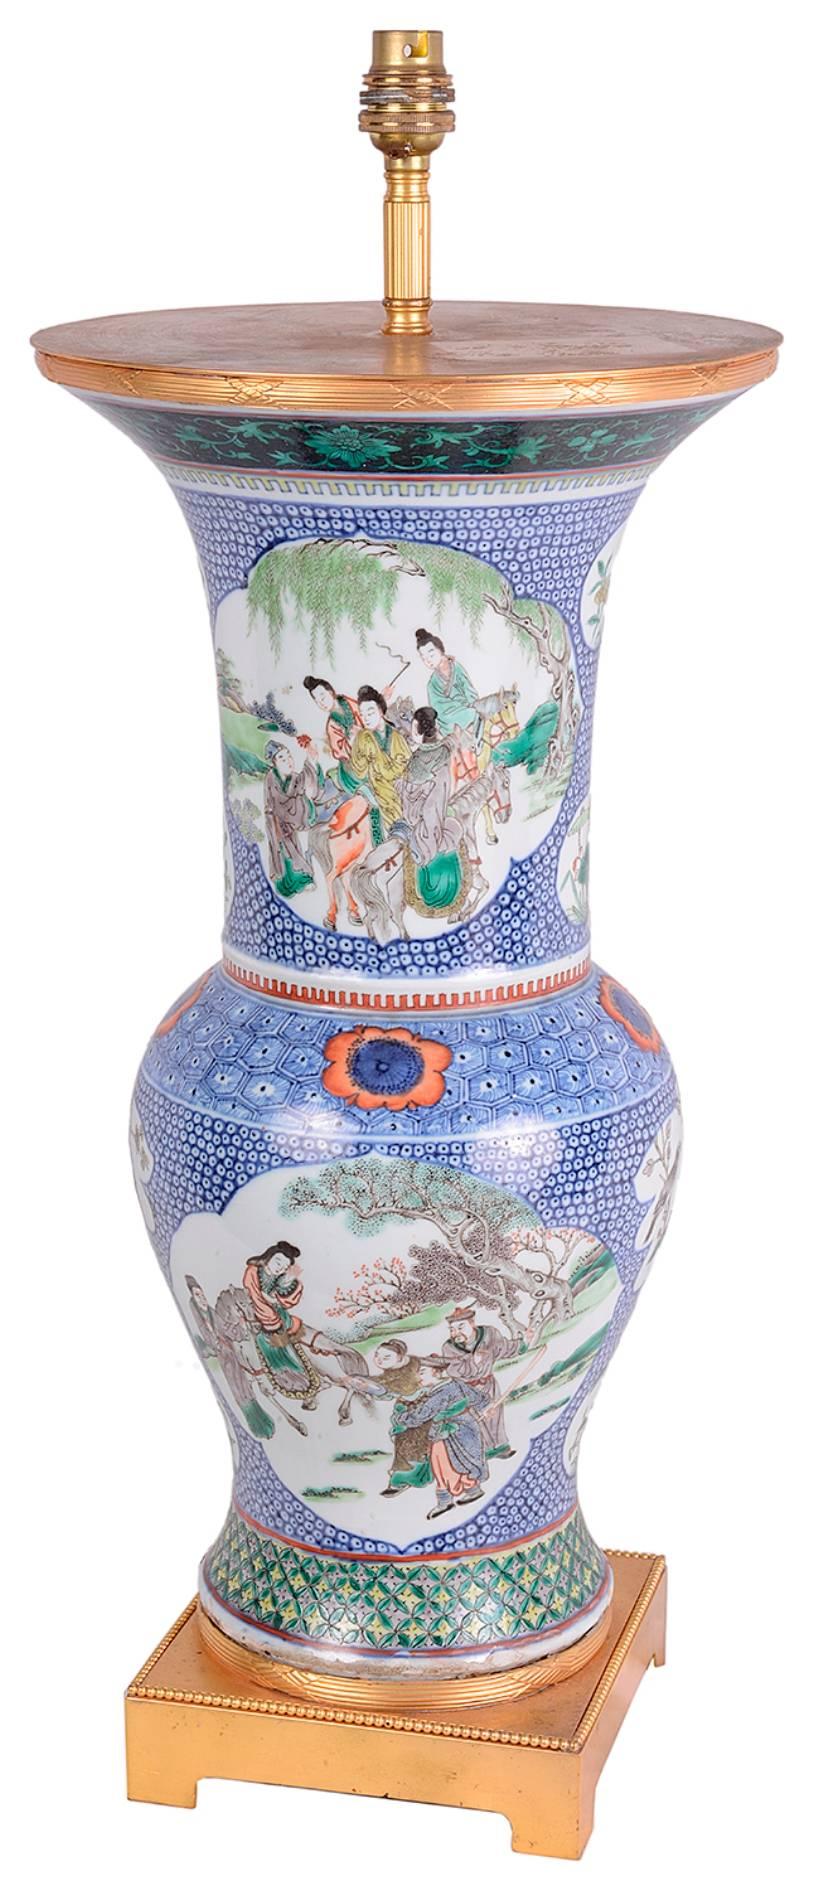 A good quality 19th century Chinese famille verte porcelain vase depicting classical scenes of men and women in gardens. Having gilded ormolu mounts top and bottom.
Converted to a lamp.